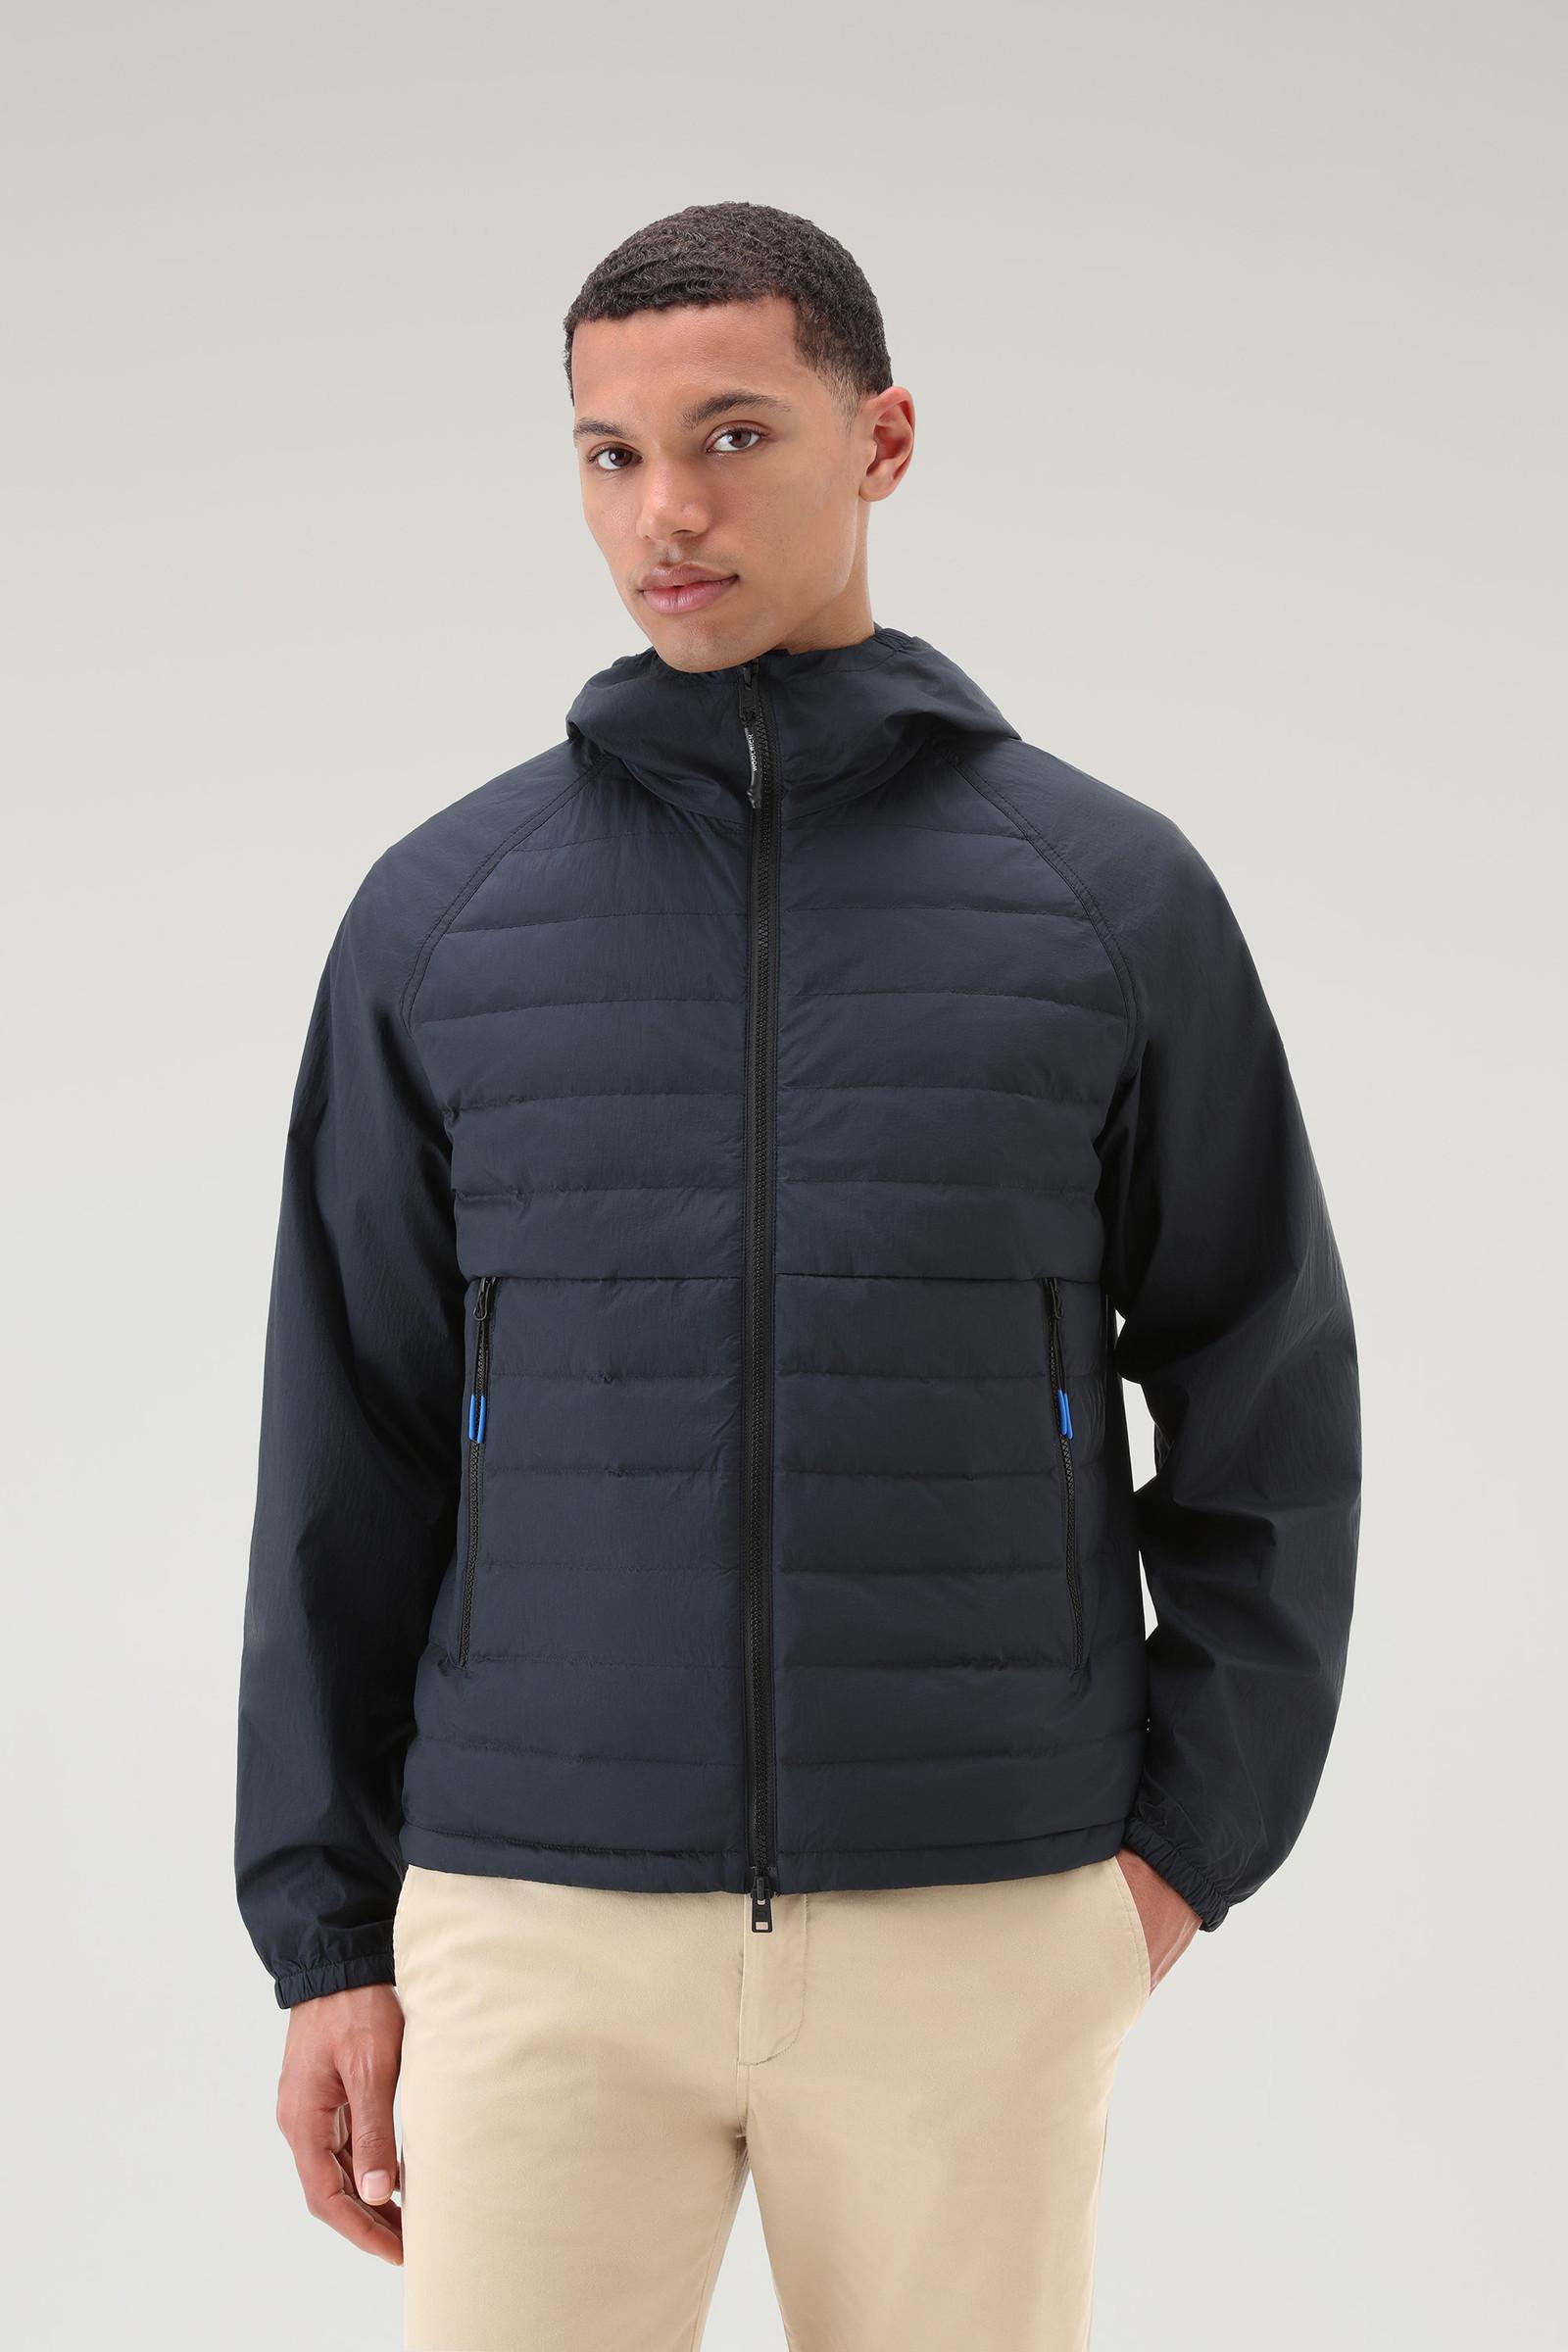 Woolrich Hybrid Jacket In Crinkle Nylon With Quilted Front And Hood in ...